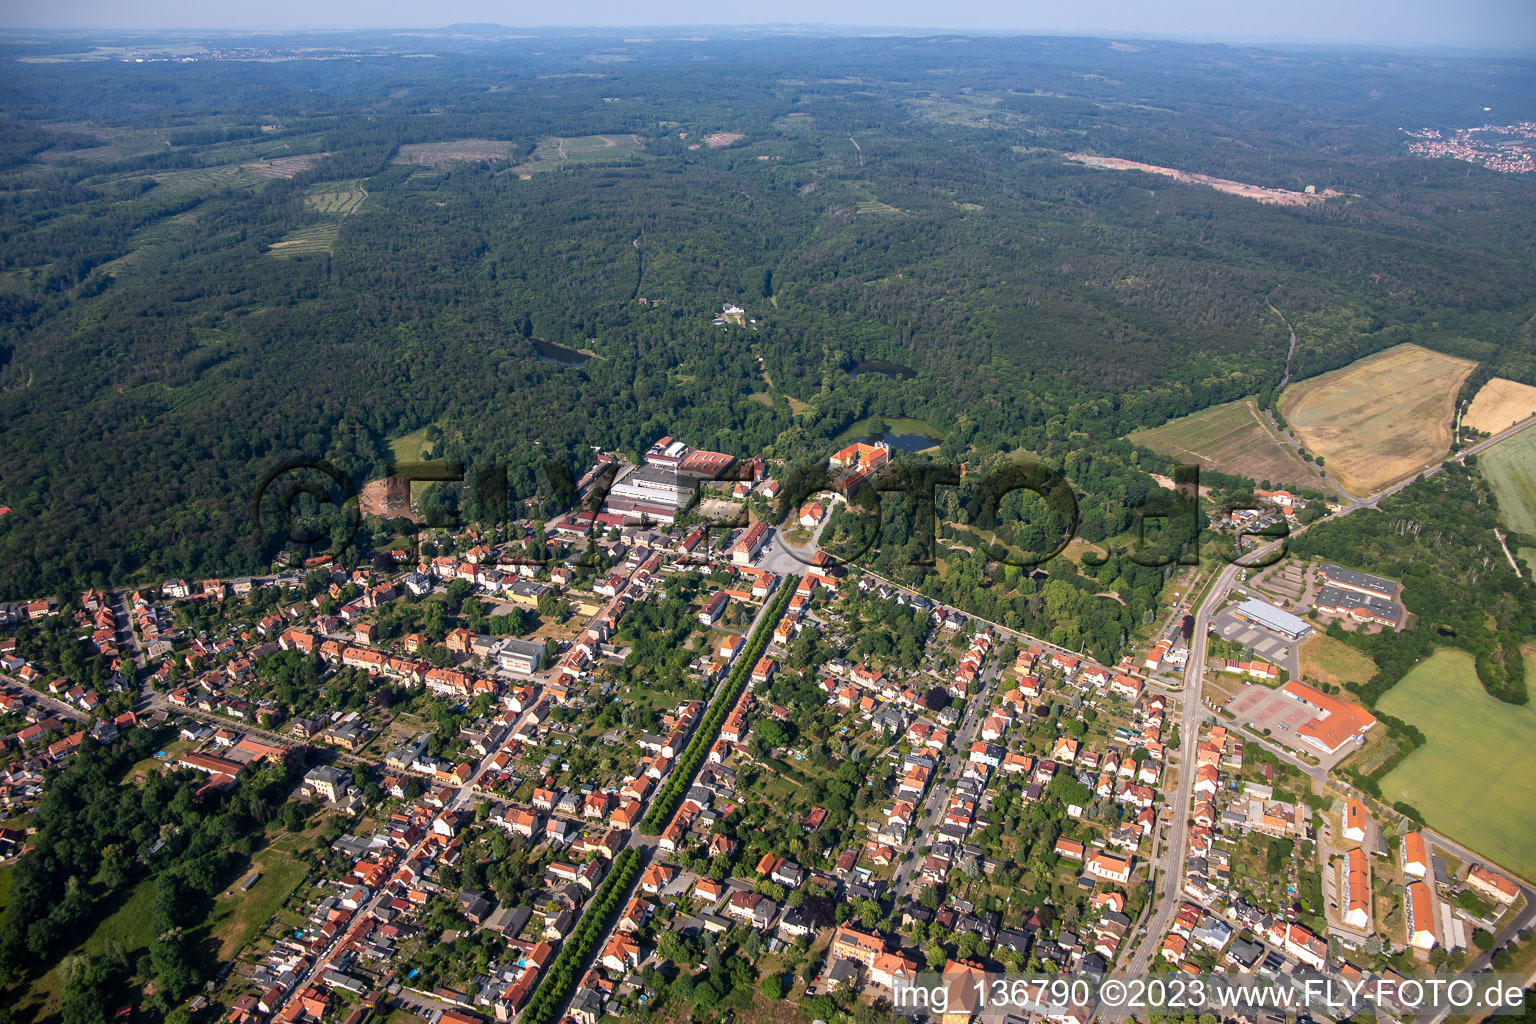 Aerial photograpy of Ballenstedt in the state Saxony-Anhalt, Germany